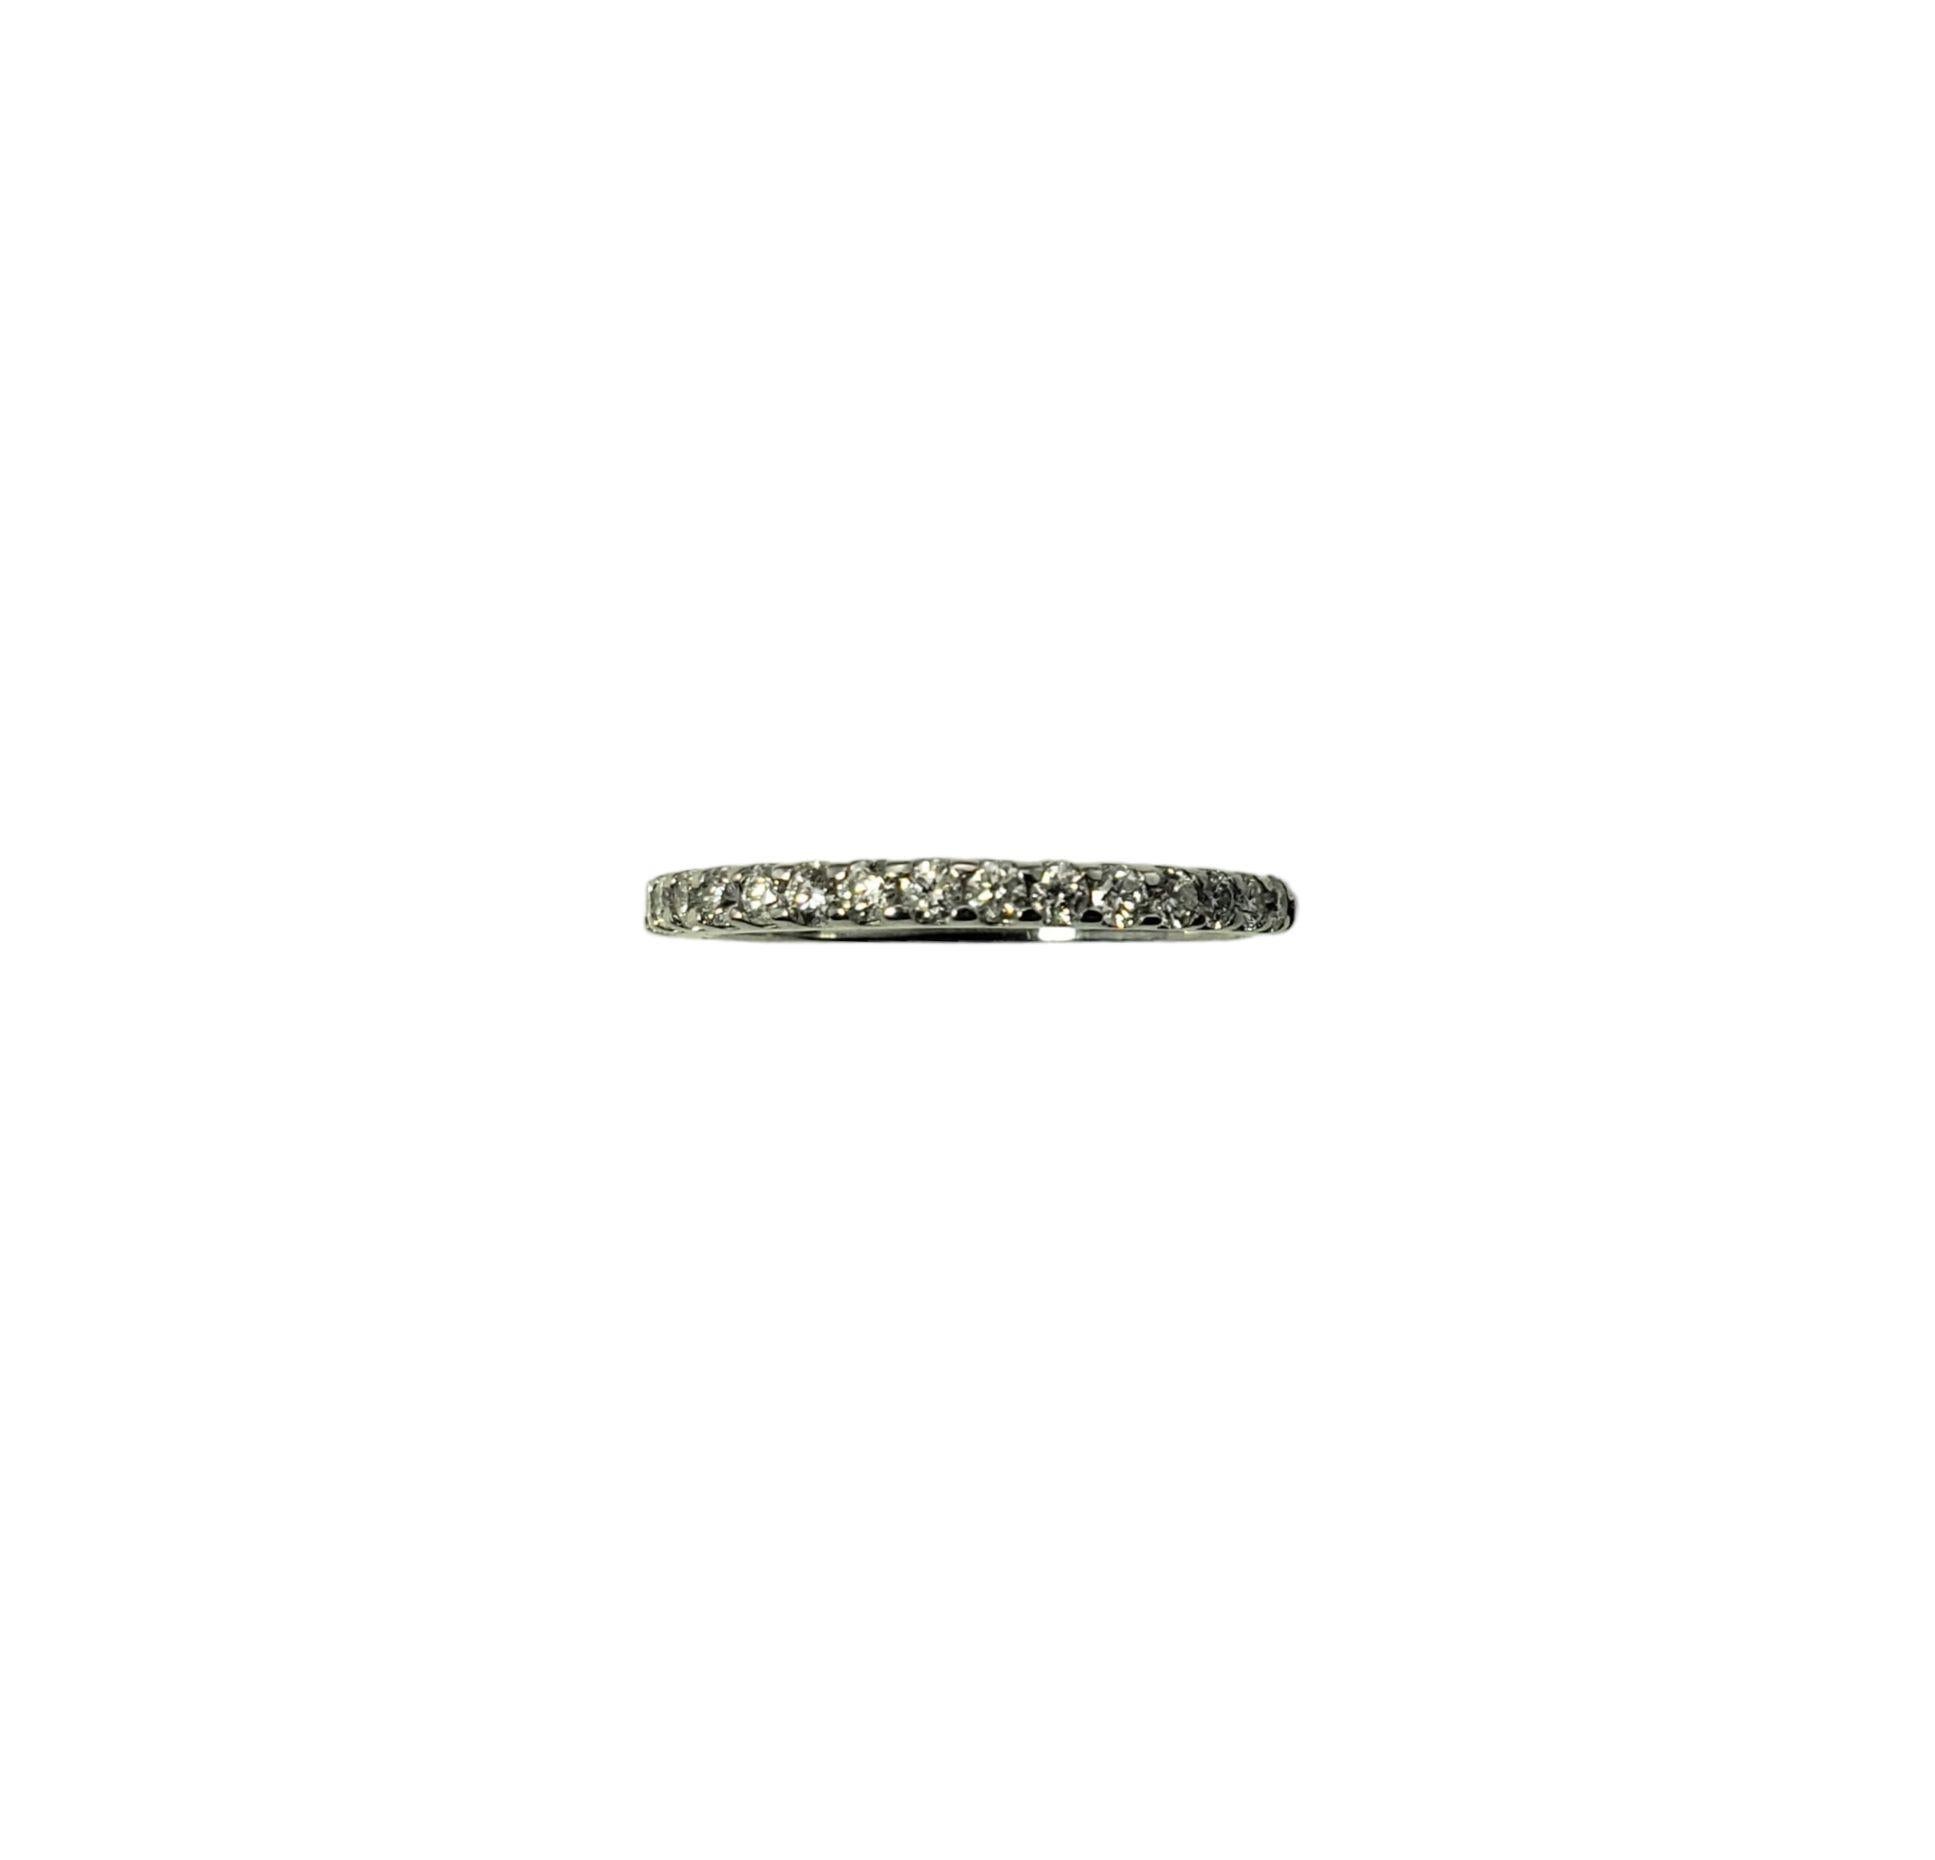 Vintage 14 Karat White Gold and Diamond Band Ring Size 5-

This sparkling band features 17 round brilliant cut diamonds set in classic 14K white gold. Width: 2 mm.

Approximate total diamond weight: .34 ct.

Diamond clarity: I1

Diamond color: